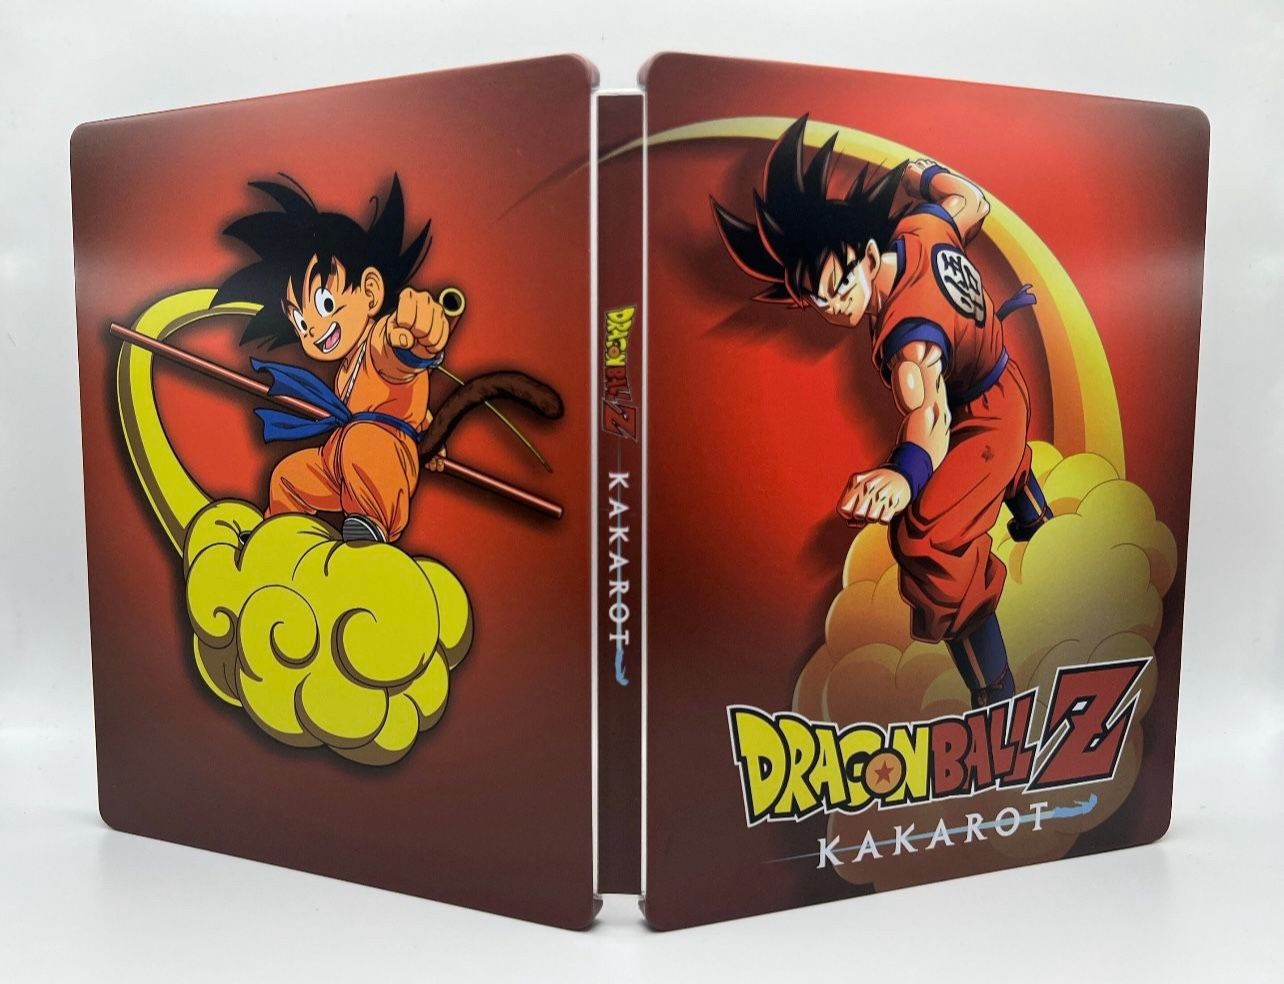 Dragonball Z Kakarot Custom made Steelbook Case only for PS4/PS5/Xbox (No Game) New